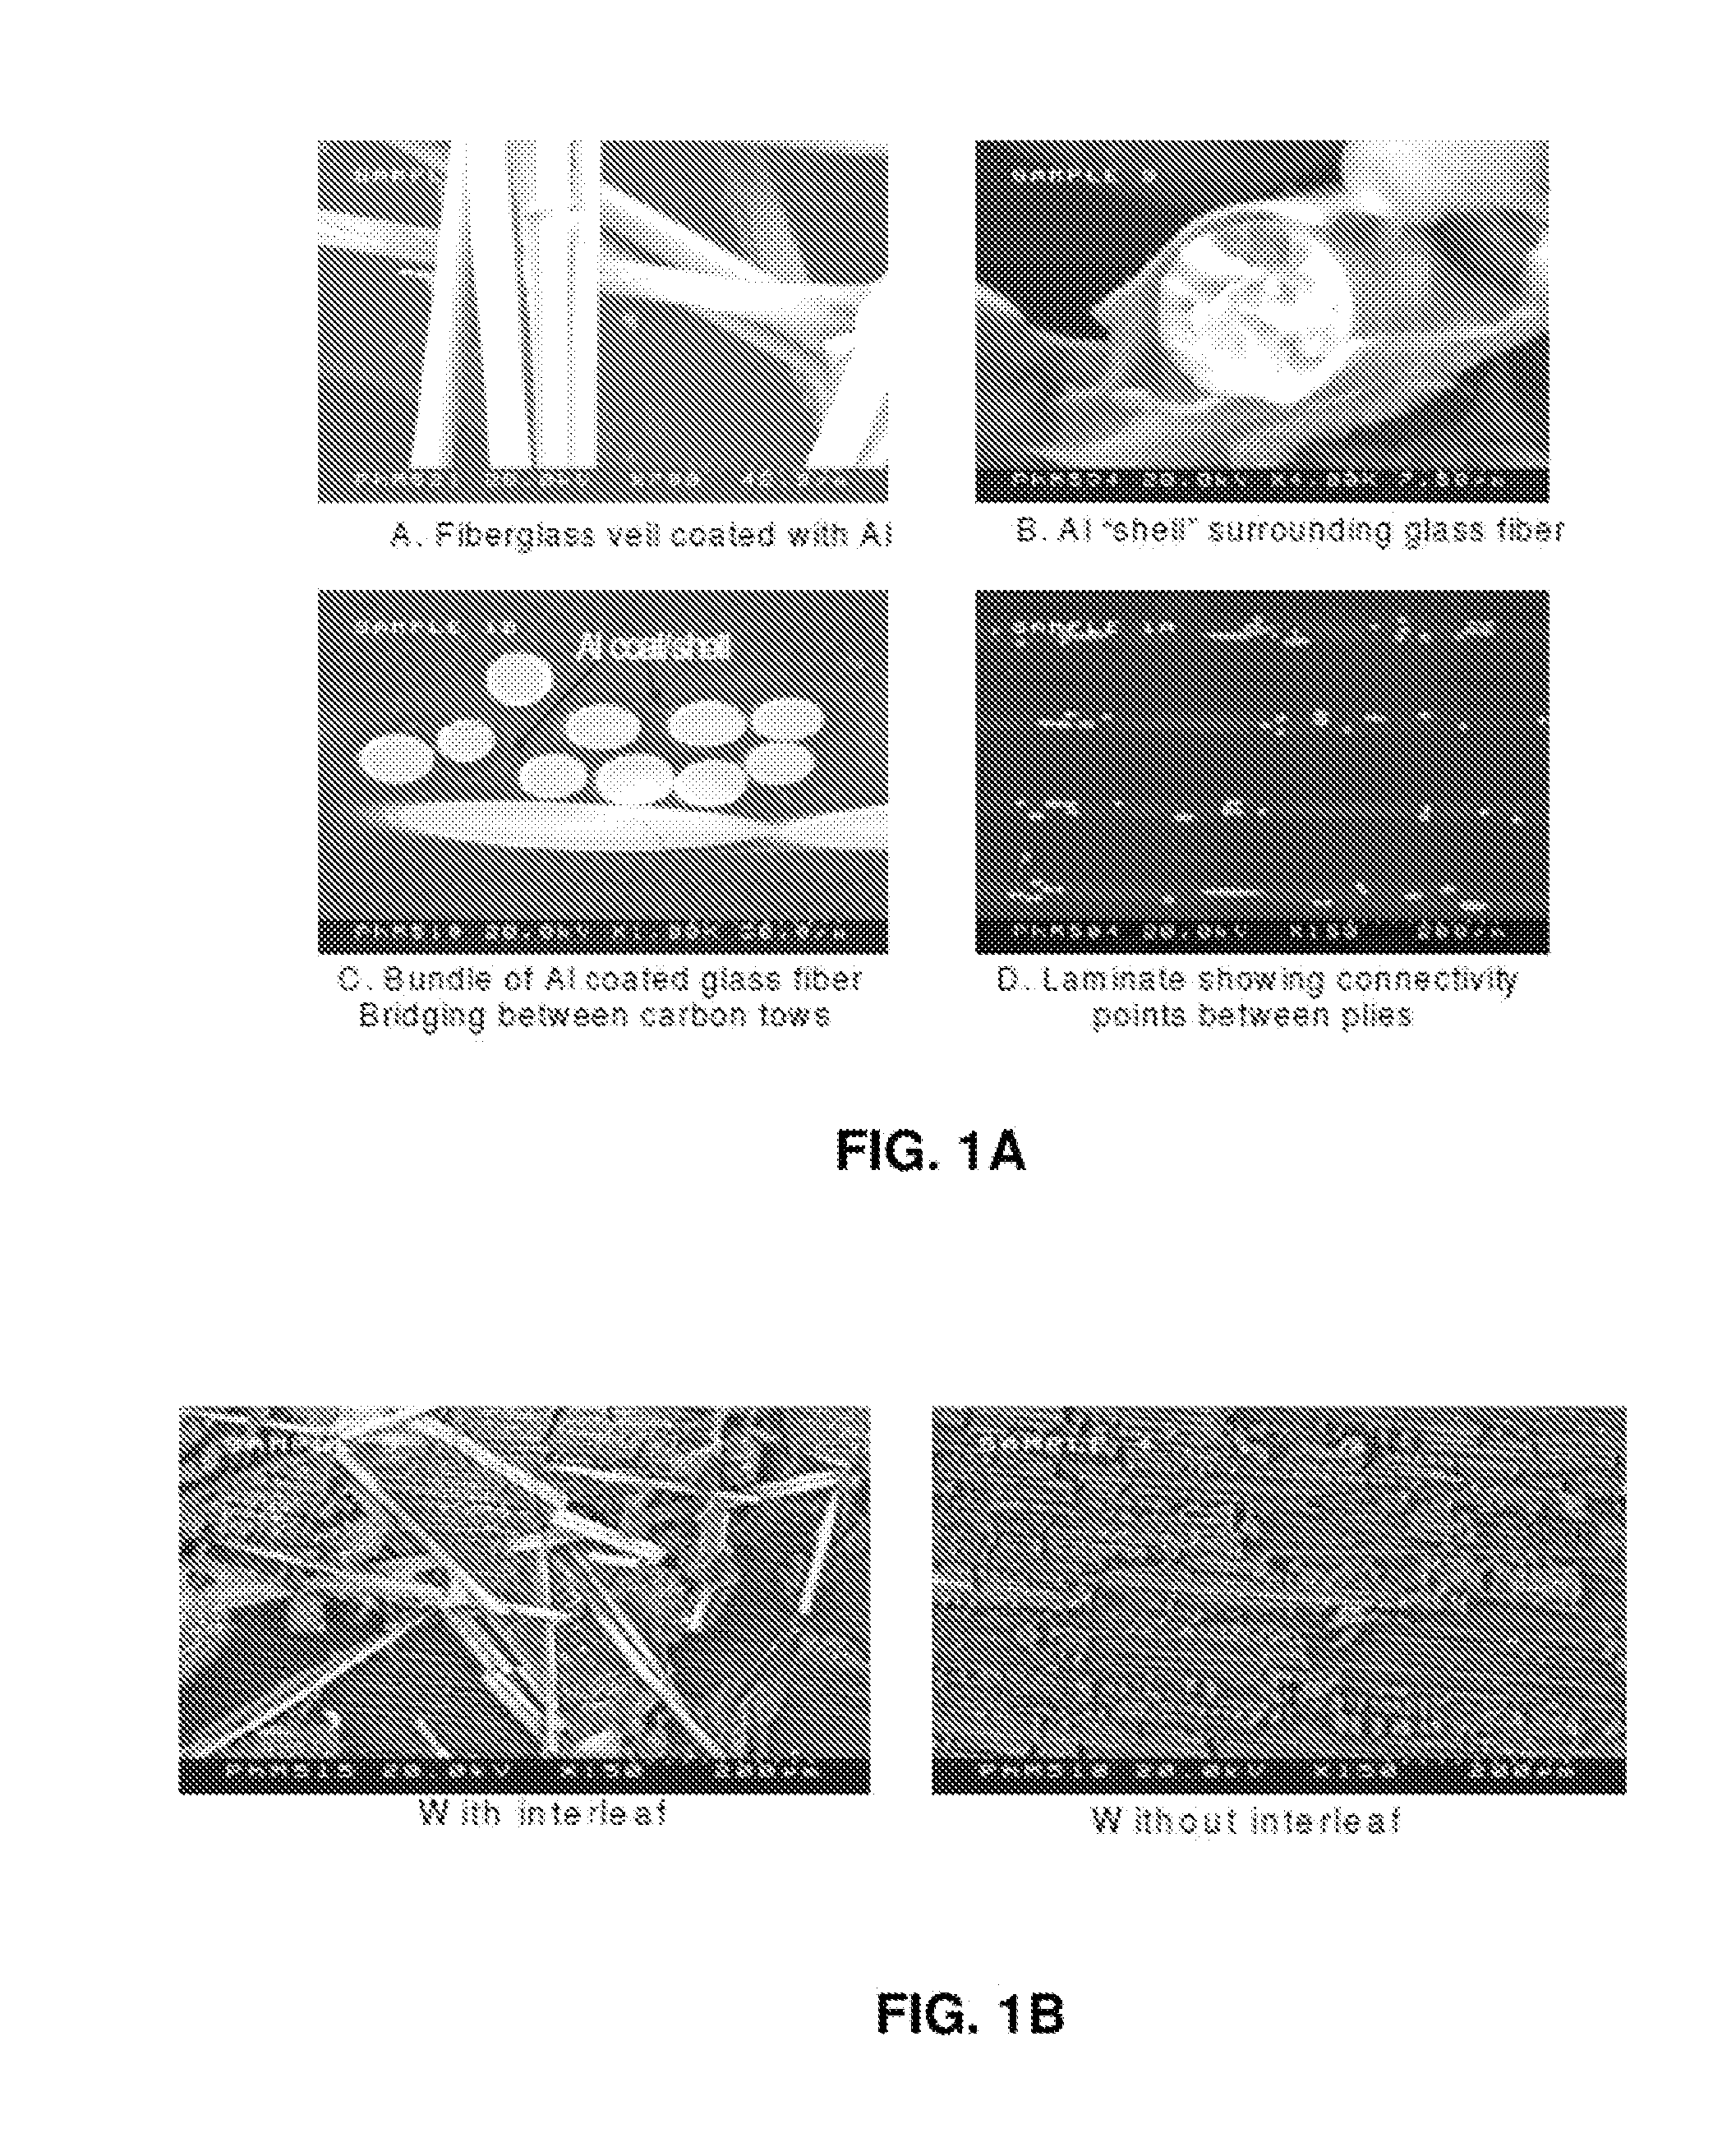 Methods of imparting conductivity to materials used in composite article fabrication & materials thereof